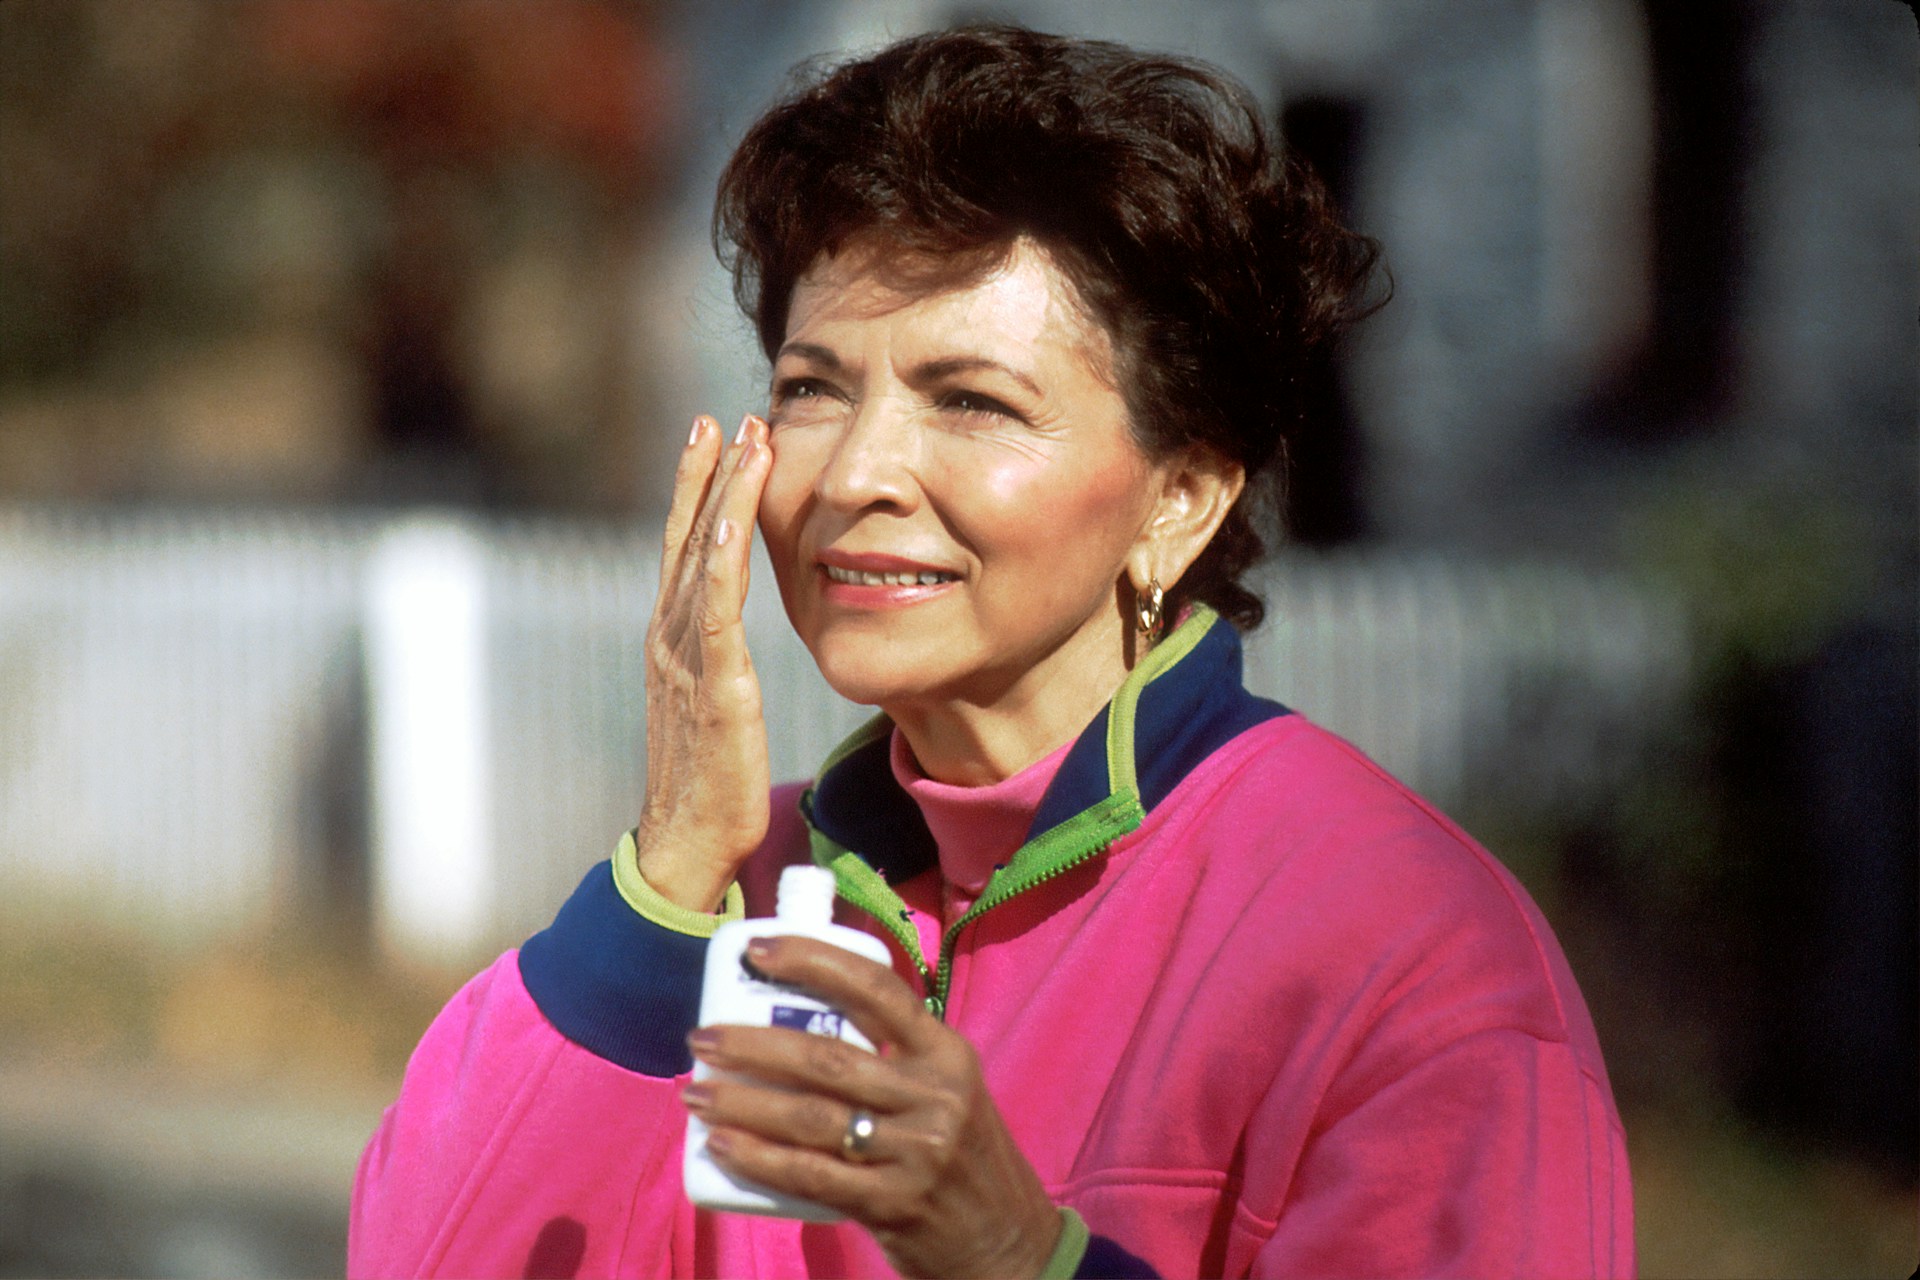 An older woman putting sunscreen on her face